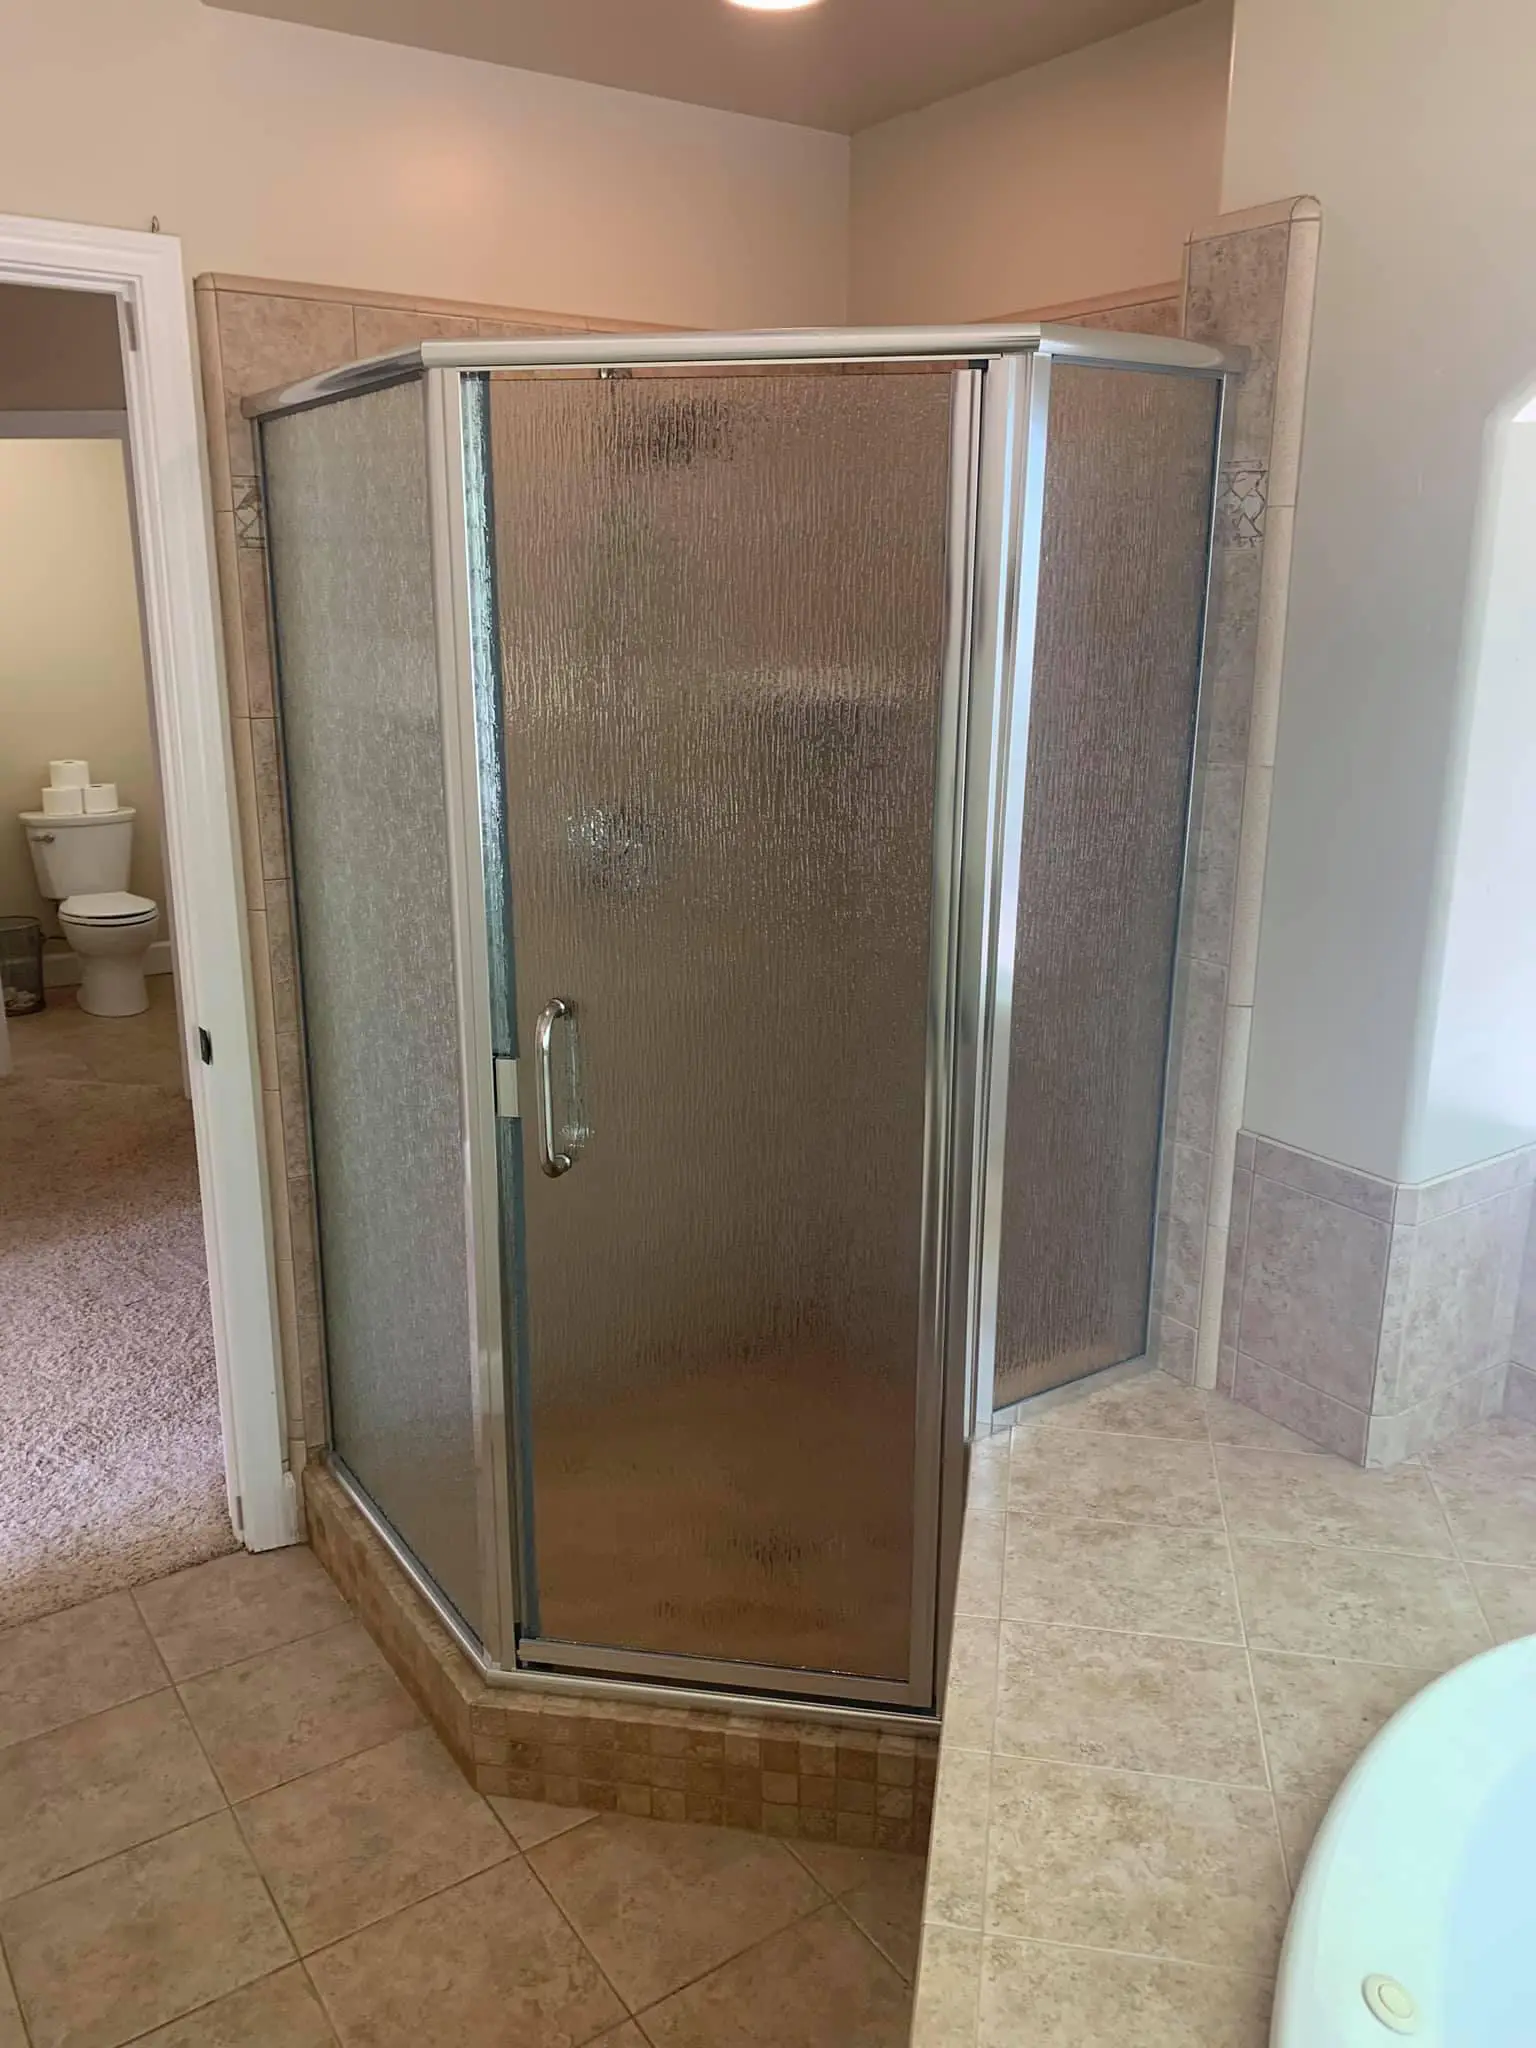 Angled privacy styled glass shower enclosure.